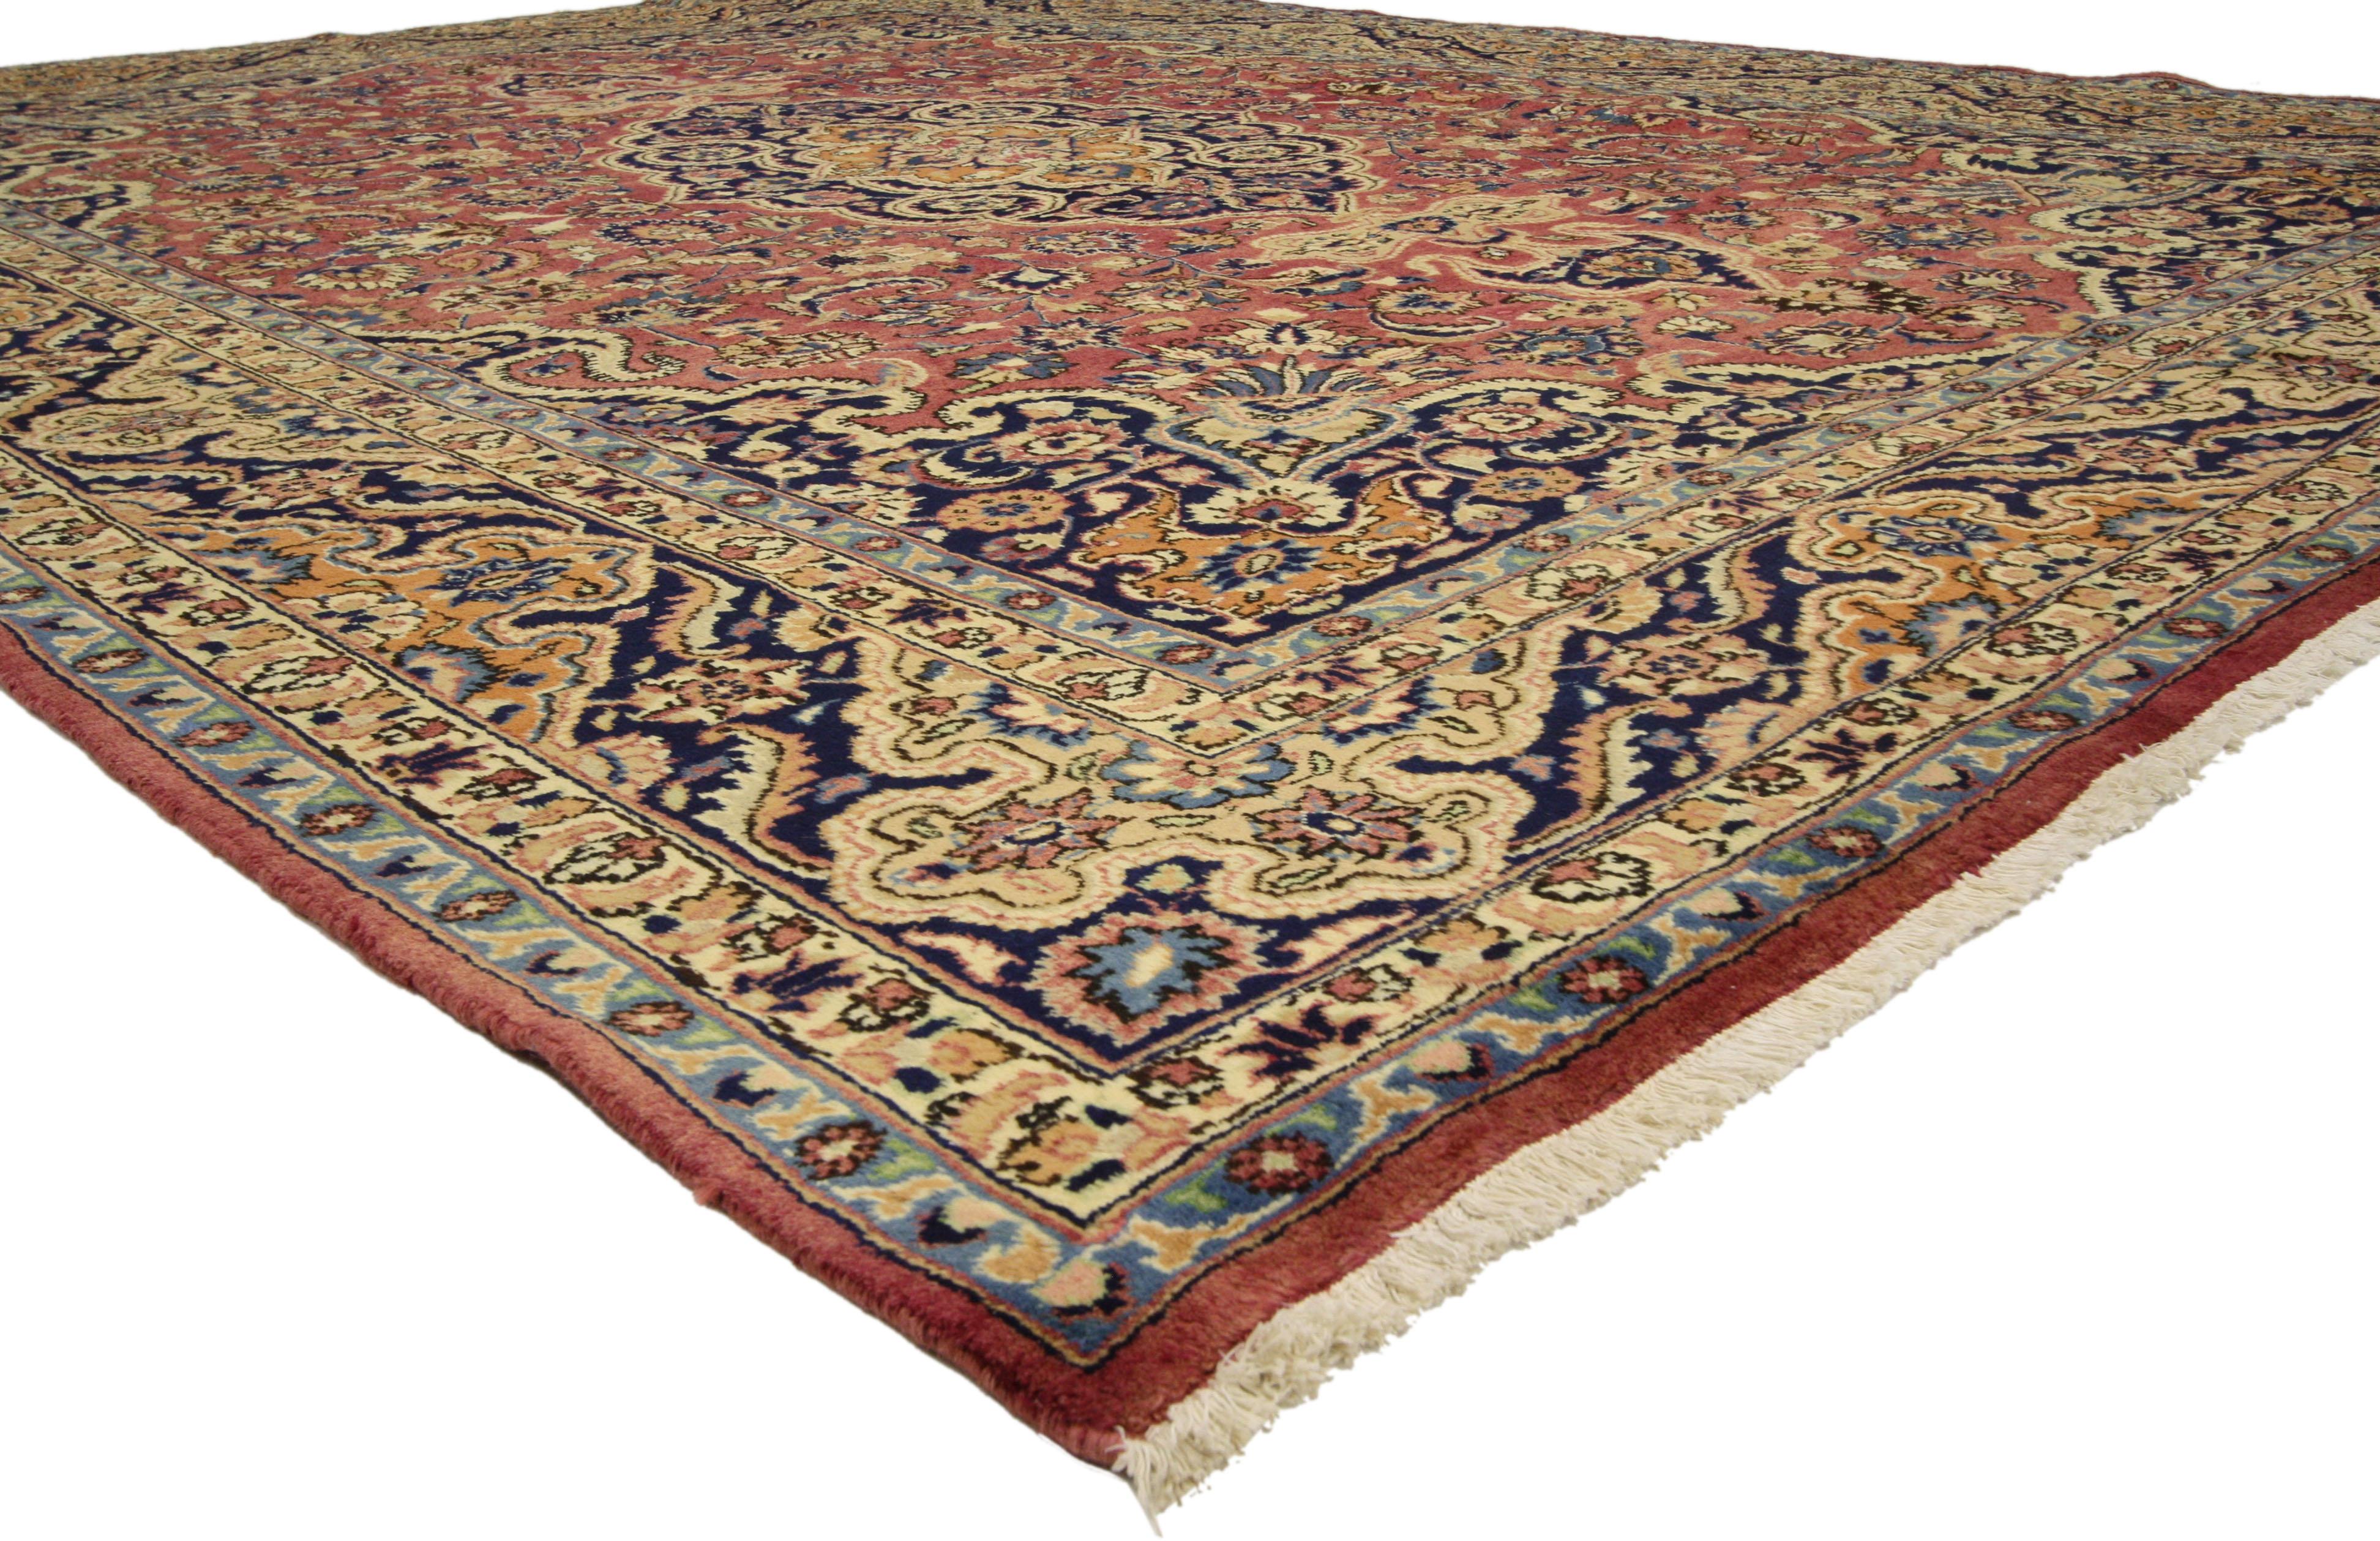 76310 Vintage Persian Mashhad Area Rug with Arabesque Baroque Regency Style. This hand-knotted wool vintage Persian Mashhad rug features a cusped lozenge Mashhad medallion flanked by palmette finials in a field of palmettes, feathers, serrated